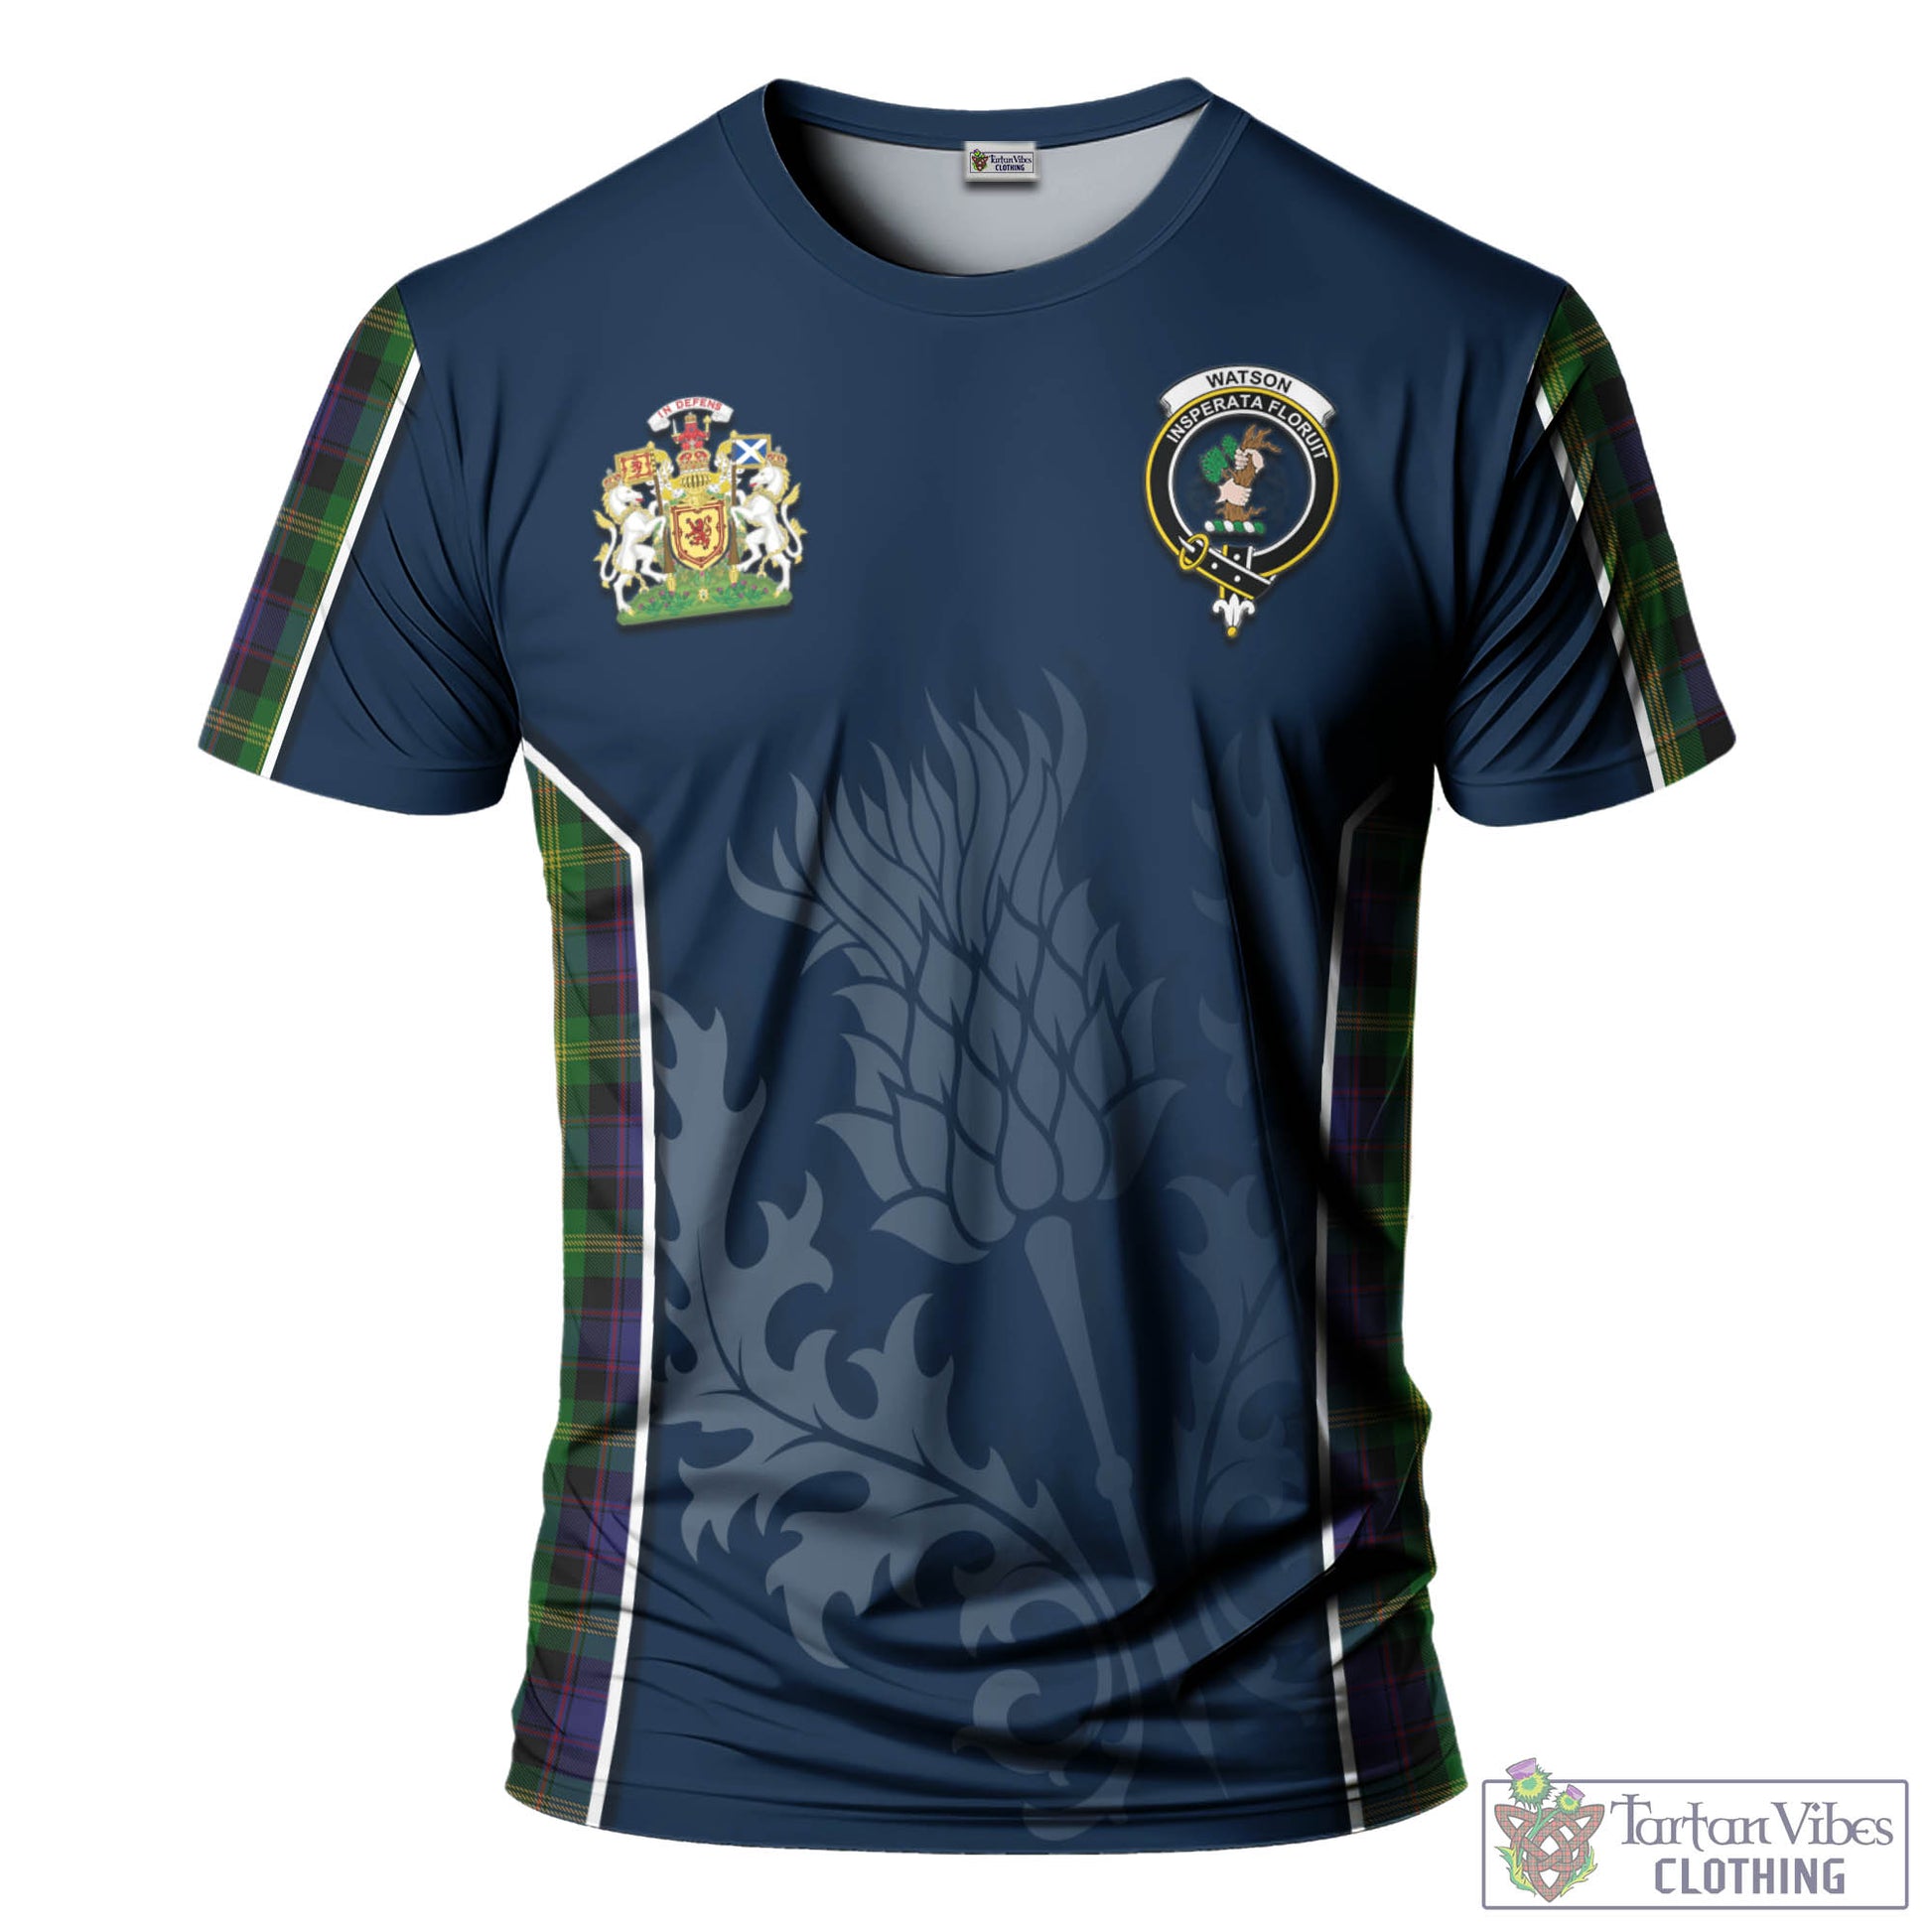 Tartan Vibes Clothing Watson Tartan T-Shirt with Family Crest and Scottish Thistle Vibes Sport Style